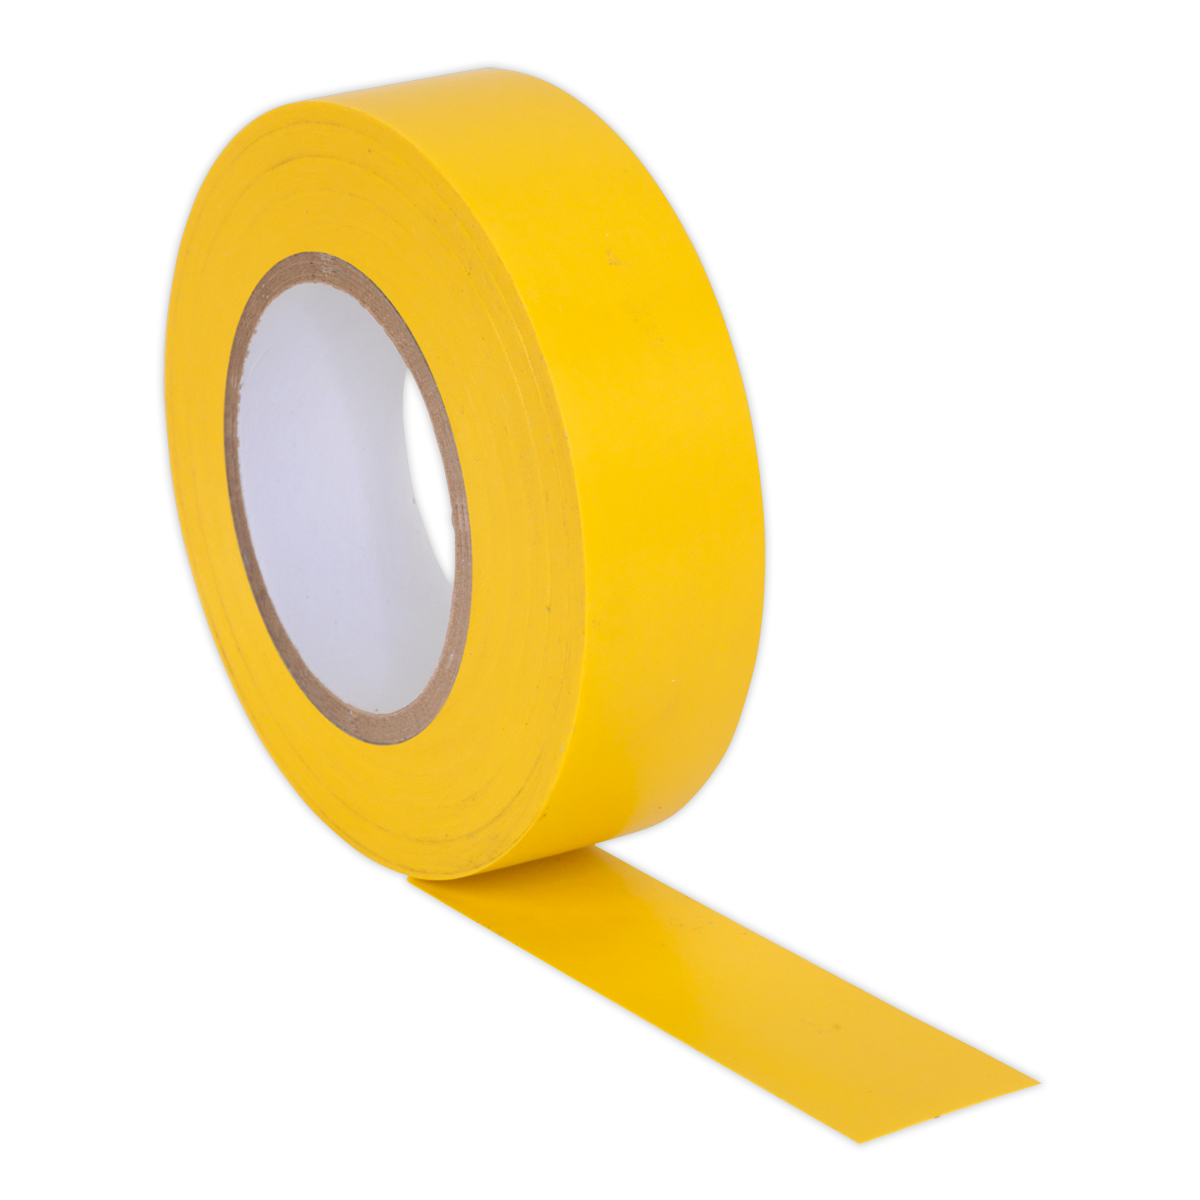 PVC Insulating Tape 19mm x 20m Yellow Pack of 10 - ITYEL10 - Farming Parts